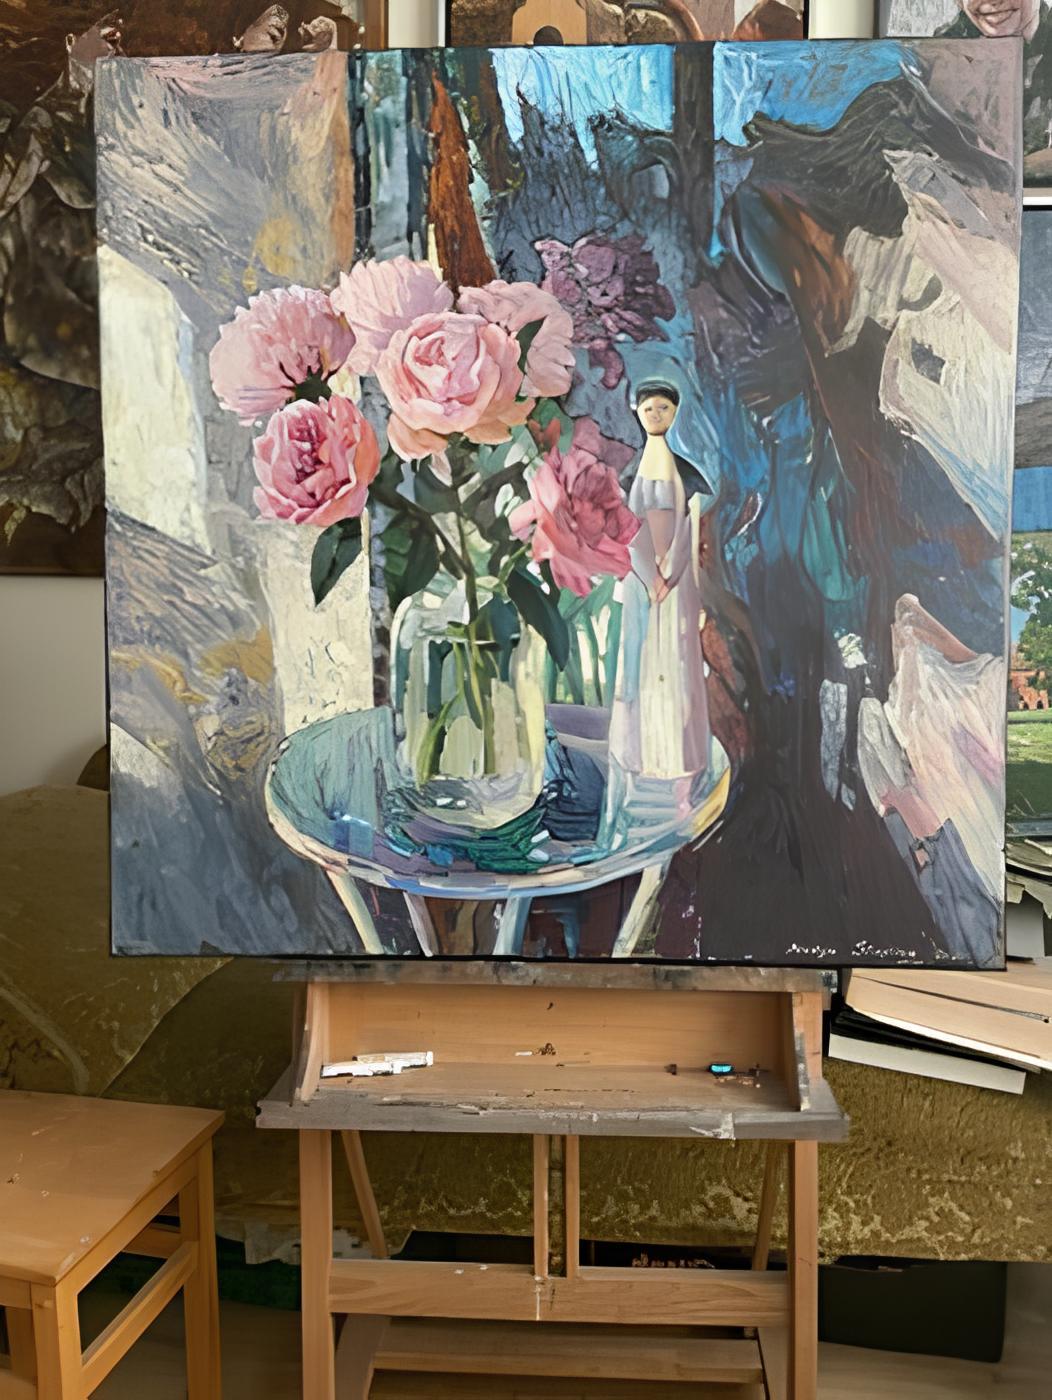 In this painting, I've poured my soul into capturing the delicate interplay between natural beauty and spiritual grace. The lush peonies, with their robust petals, exude a sense of life's vibrant essence, while the celestial figure, standing quietly